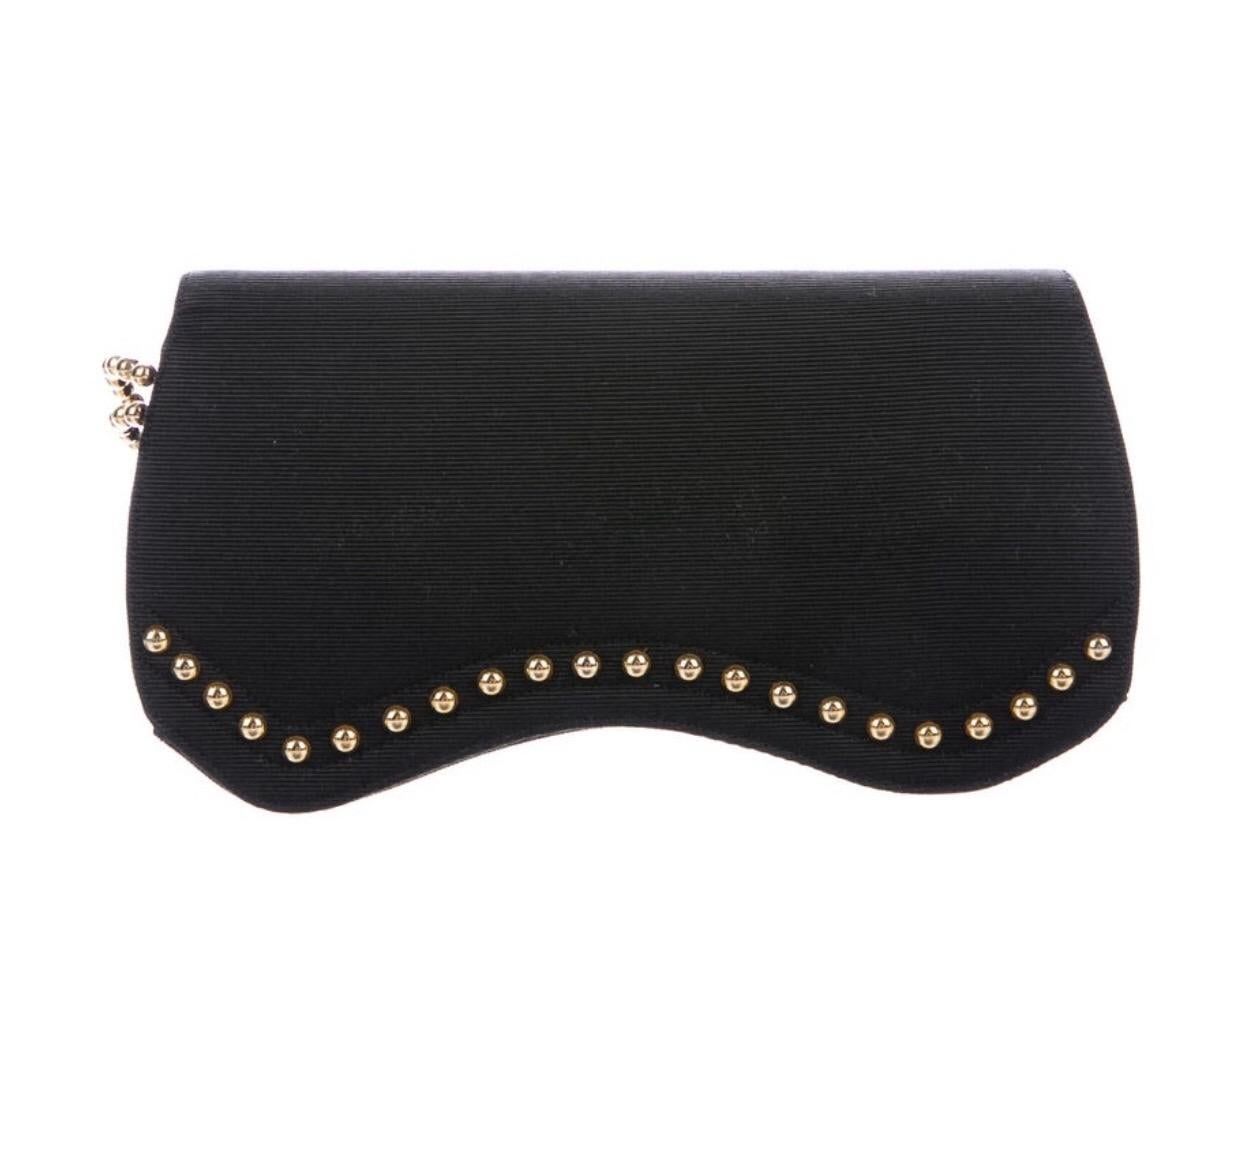 Renaud Pellegrino black fabric clutch with studs and beaded chain. 

Condition: Excellent
4.5